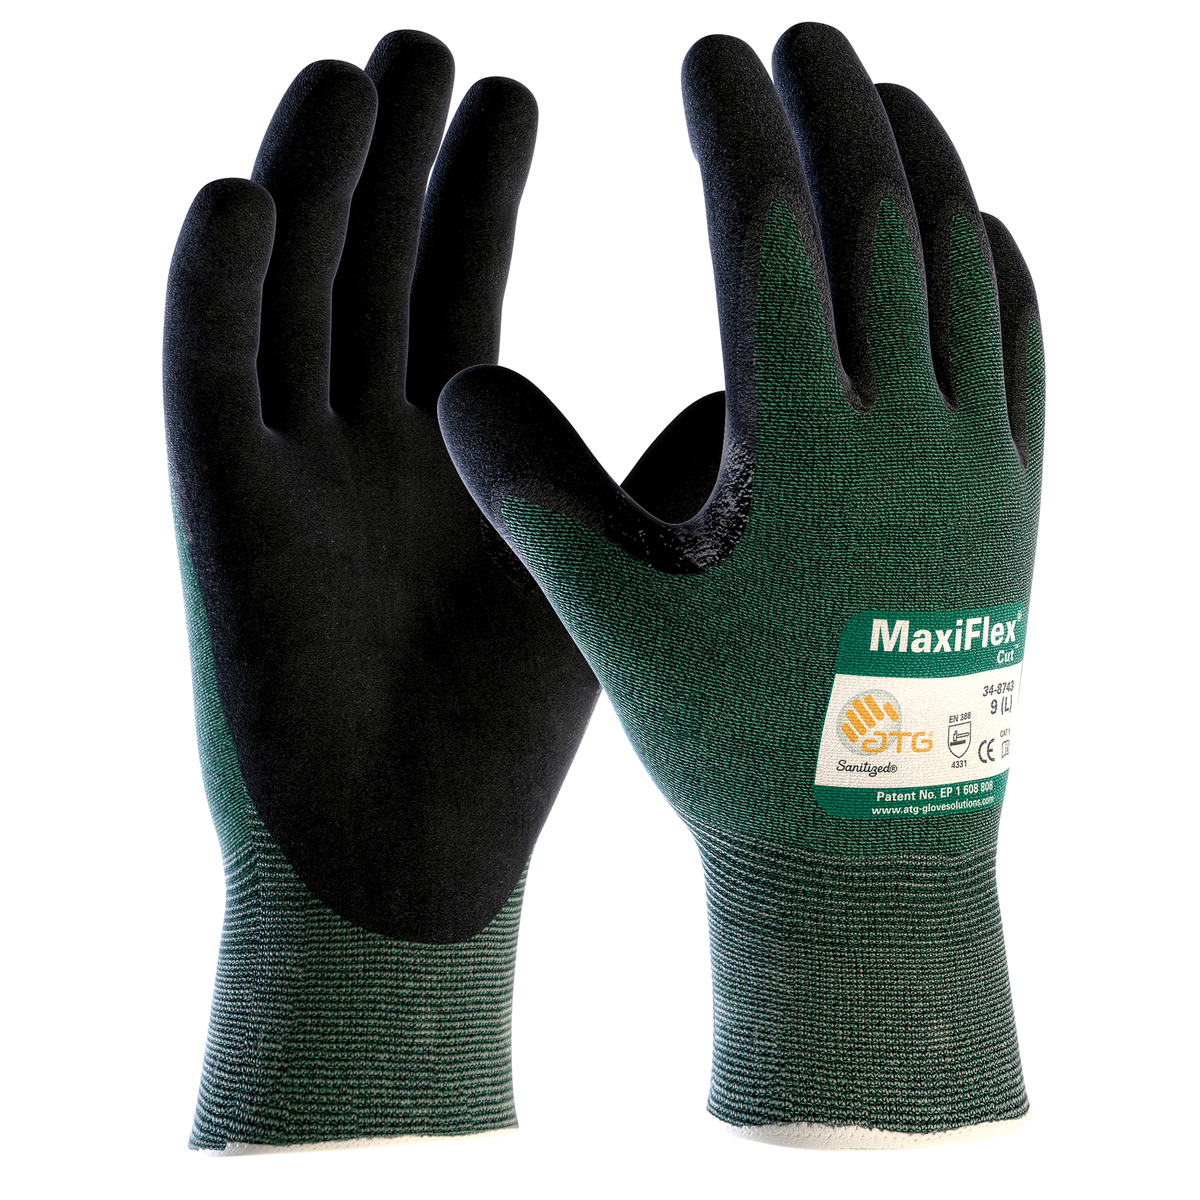 PIP® X-Large MaxiFlex® Cut™ 15 Gauge Engineered Yarn Cut Resistant Gloves With Nitrile Coating